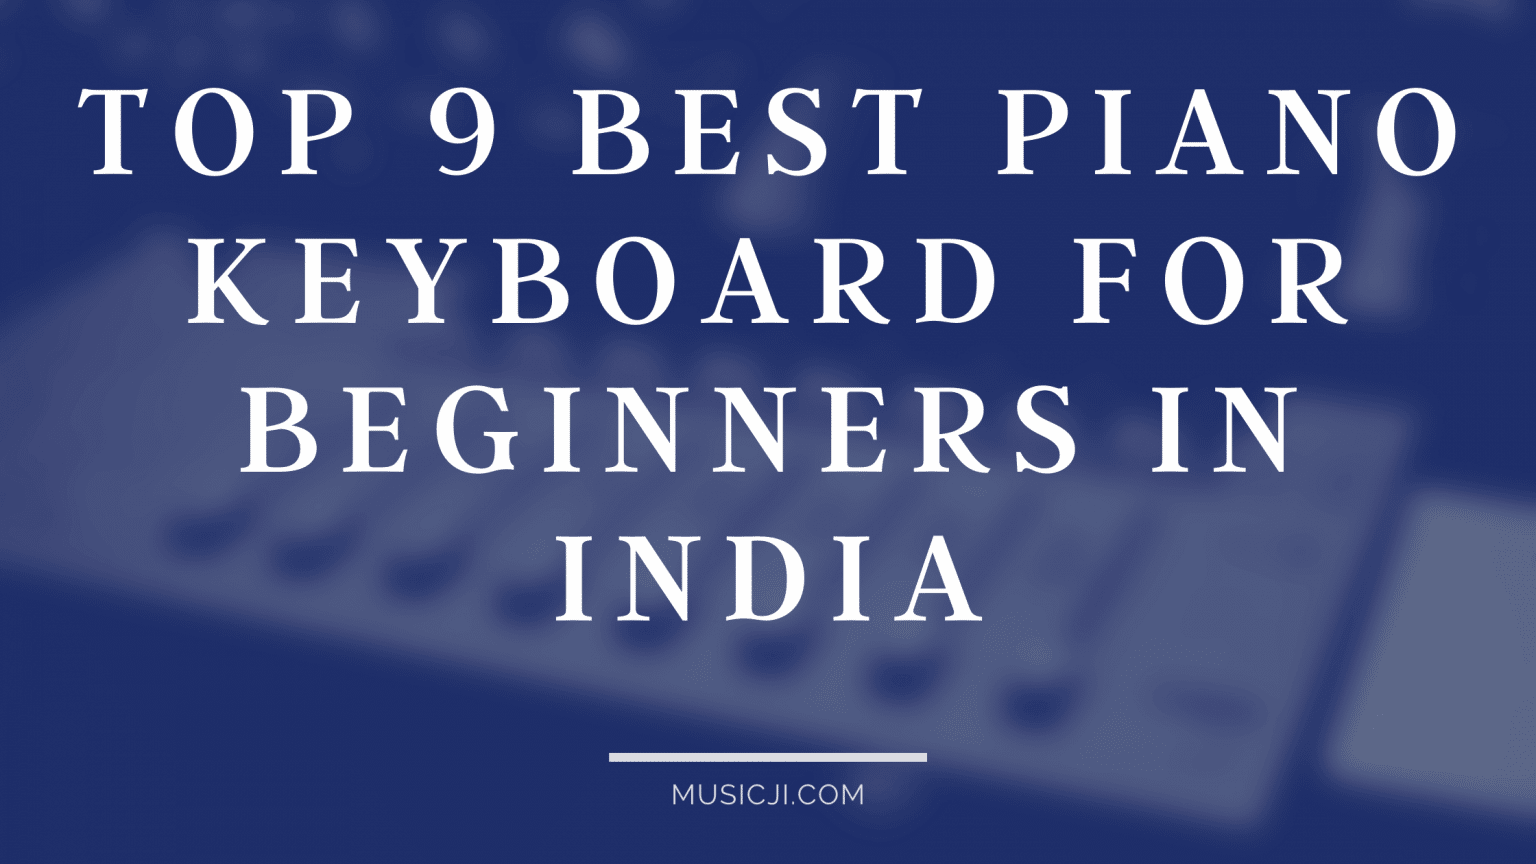 Top 9 Best Piano Keyboard for beginners in India